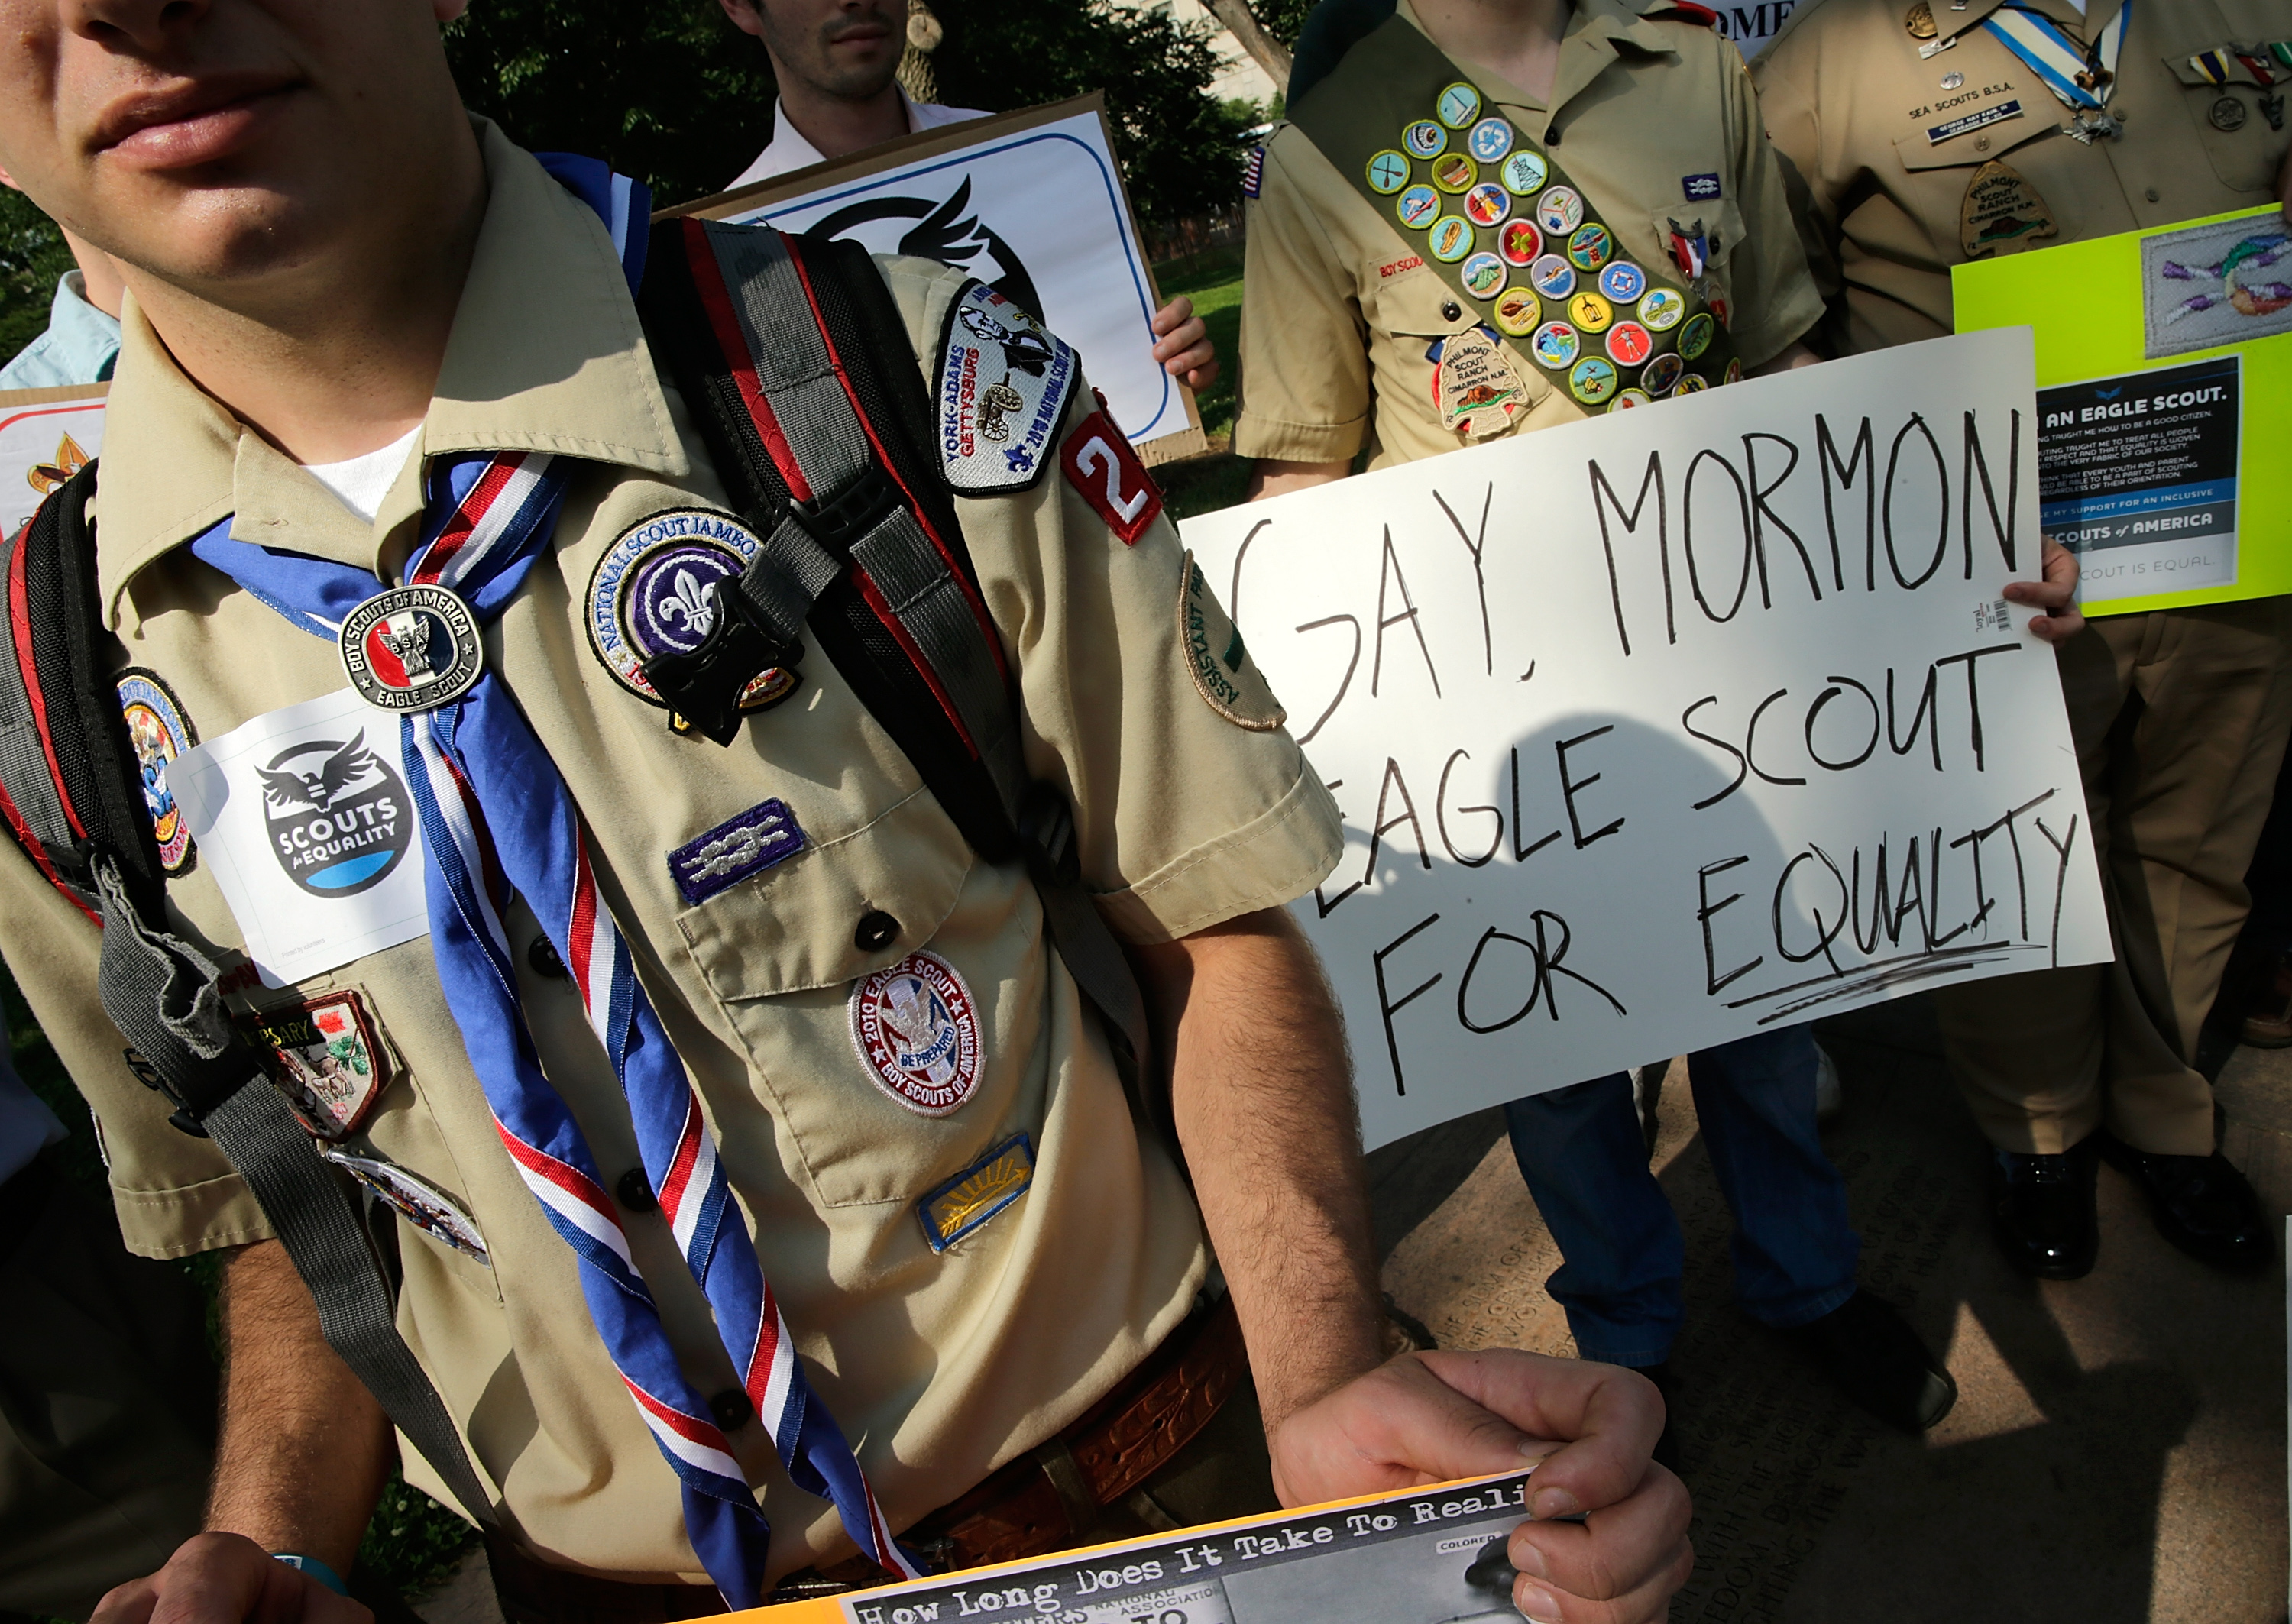 Members of Scouts for Equality hold a rally to call for equality and inclusion for gays in the Boy Scouts of America as part of the 'Scouts for Equality Day of Action' in Washington, DC.